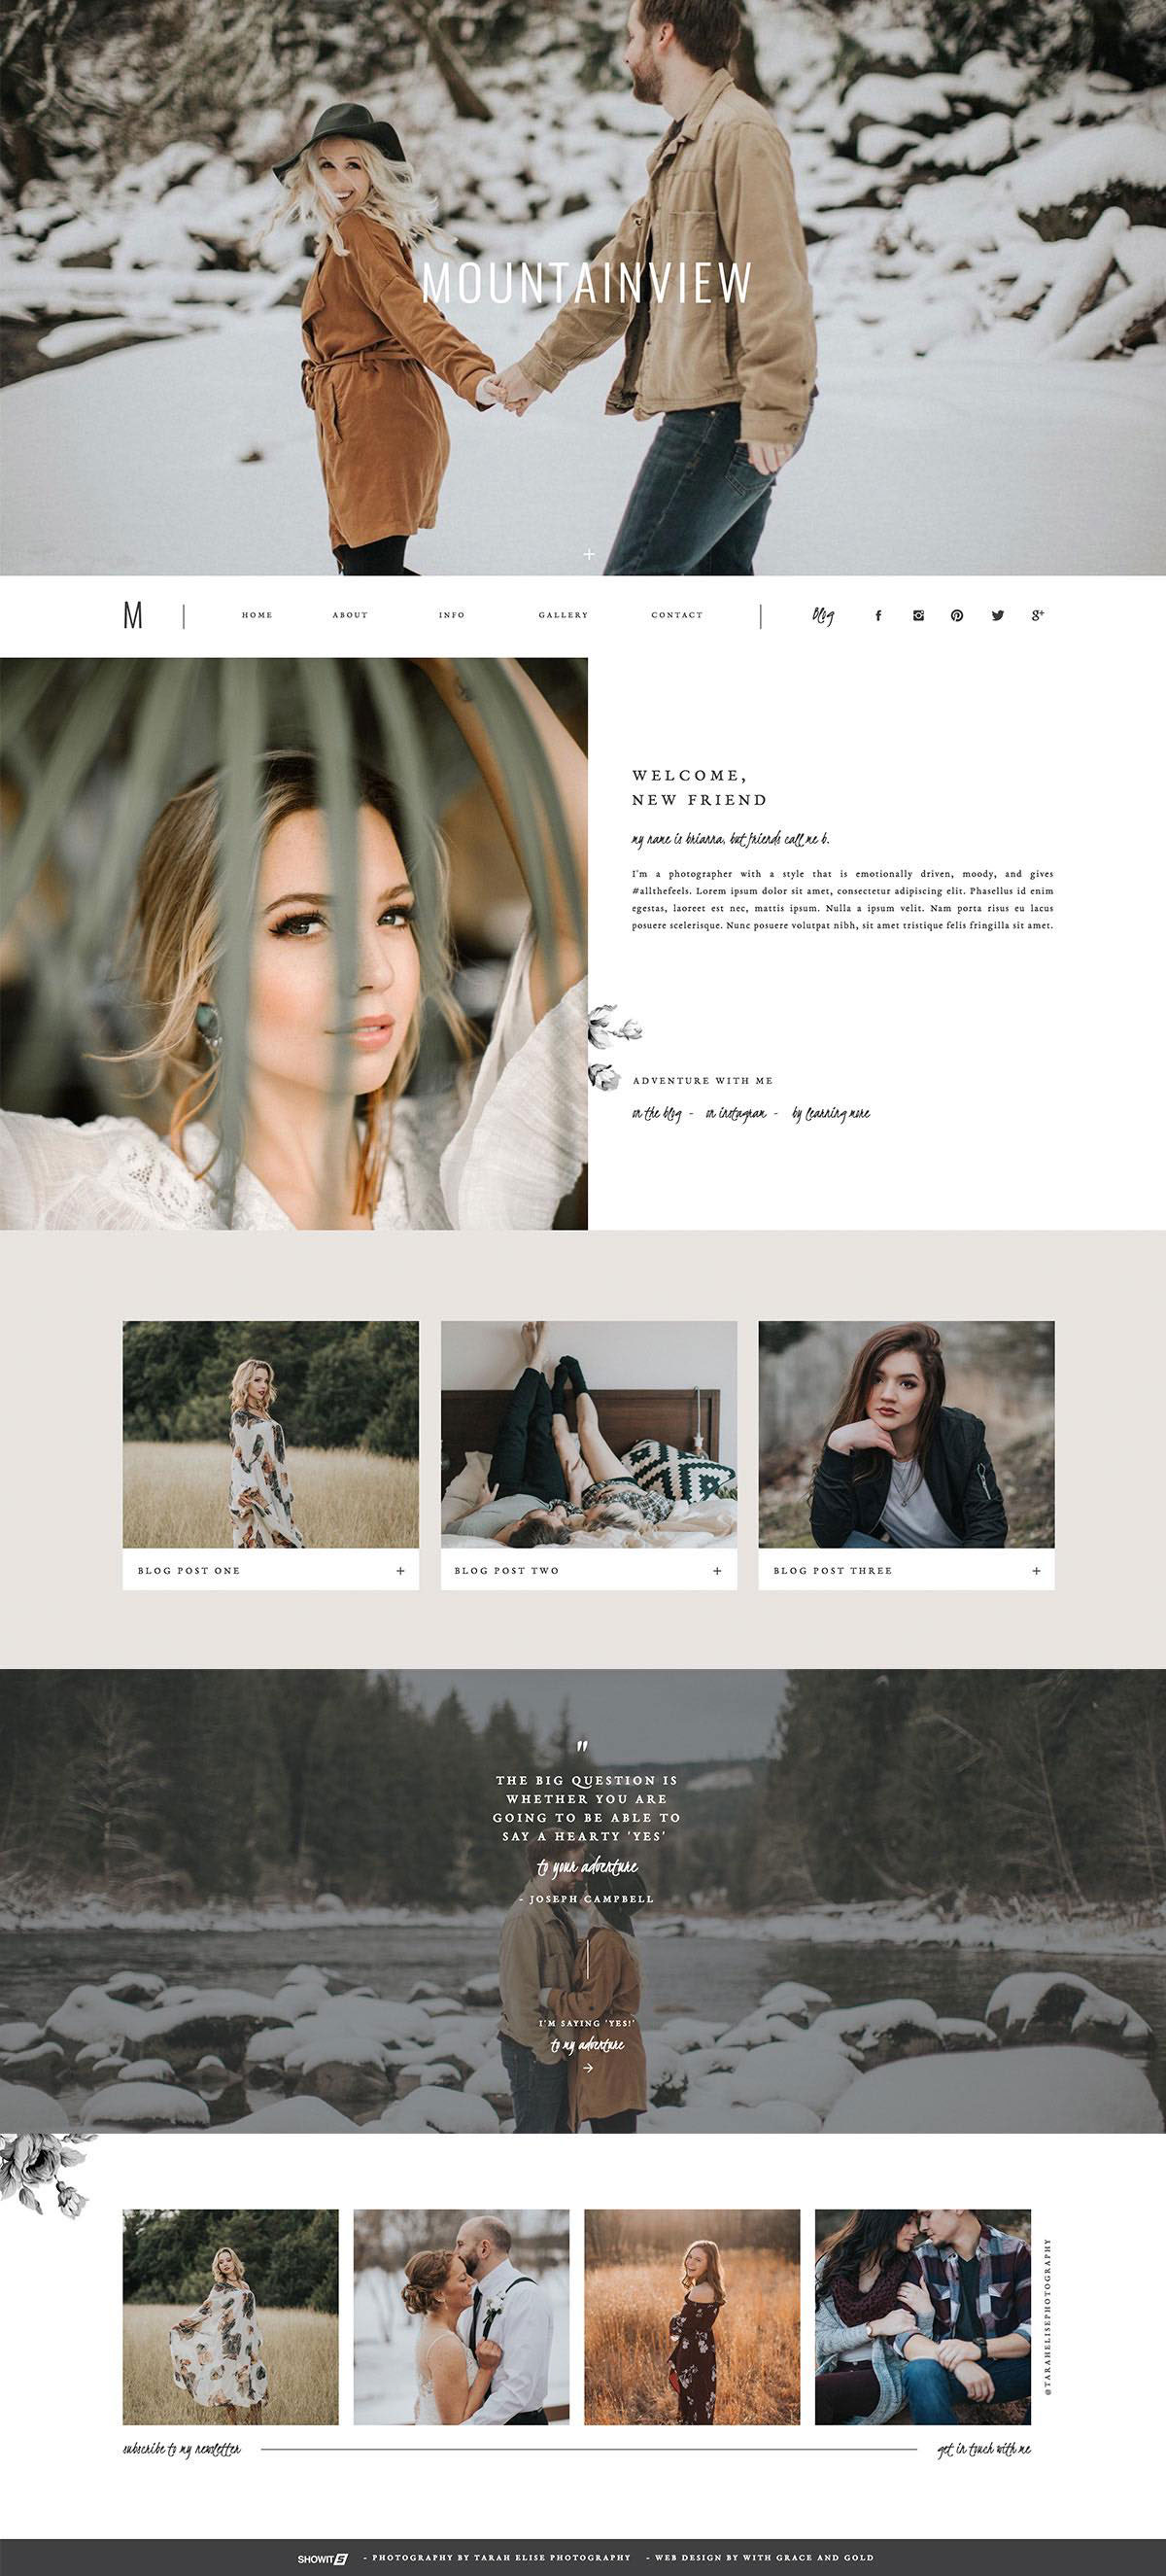 Mountainview by With Grace and Gold, photography website built for Showit.